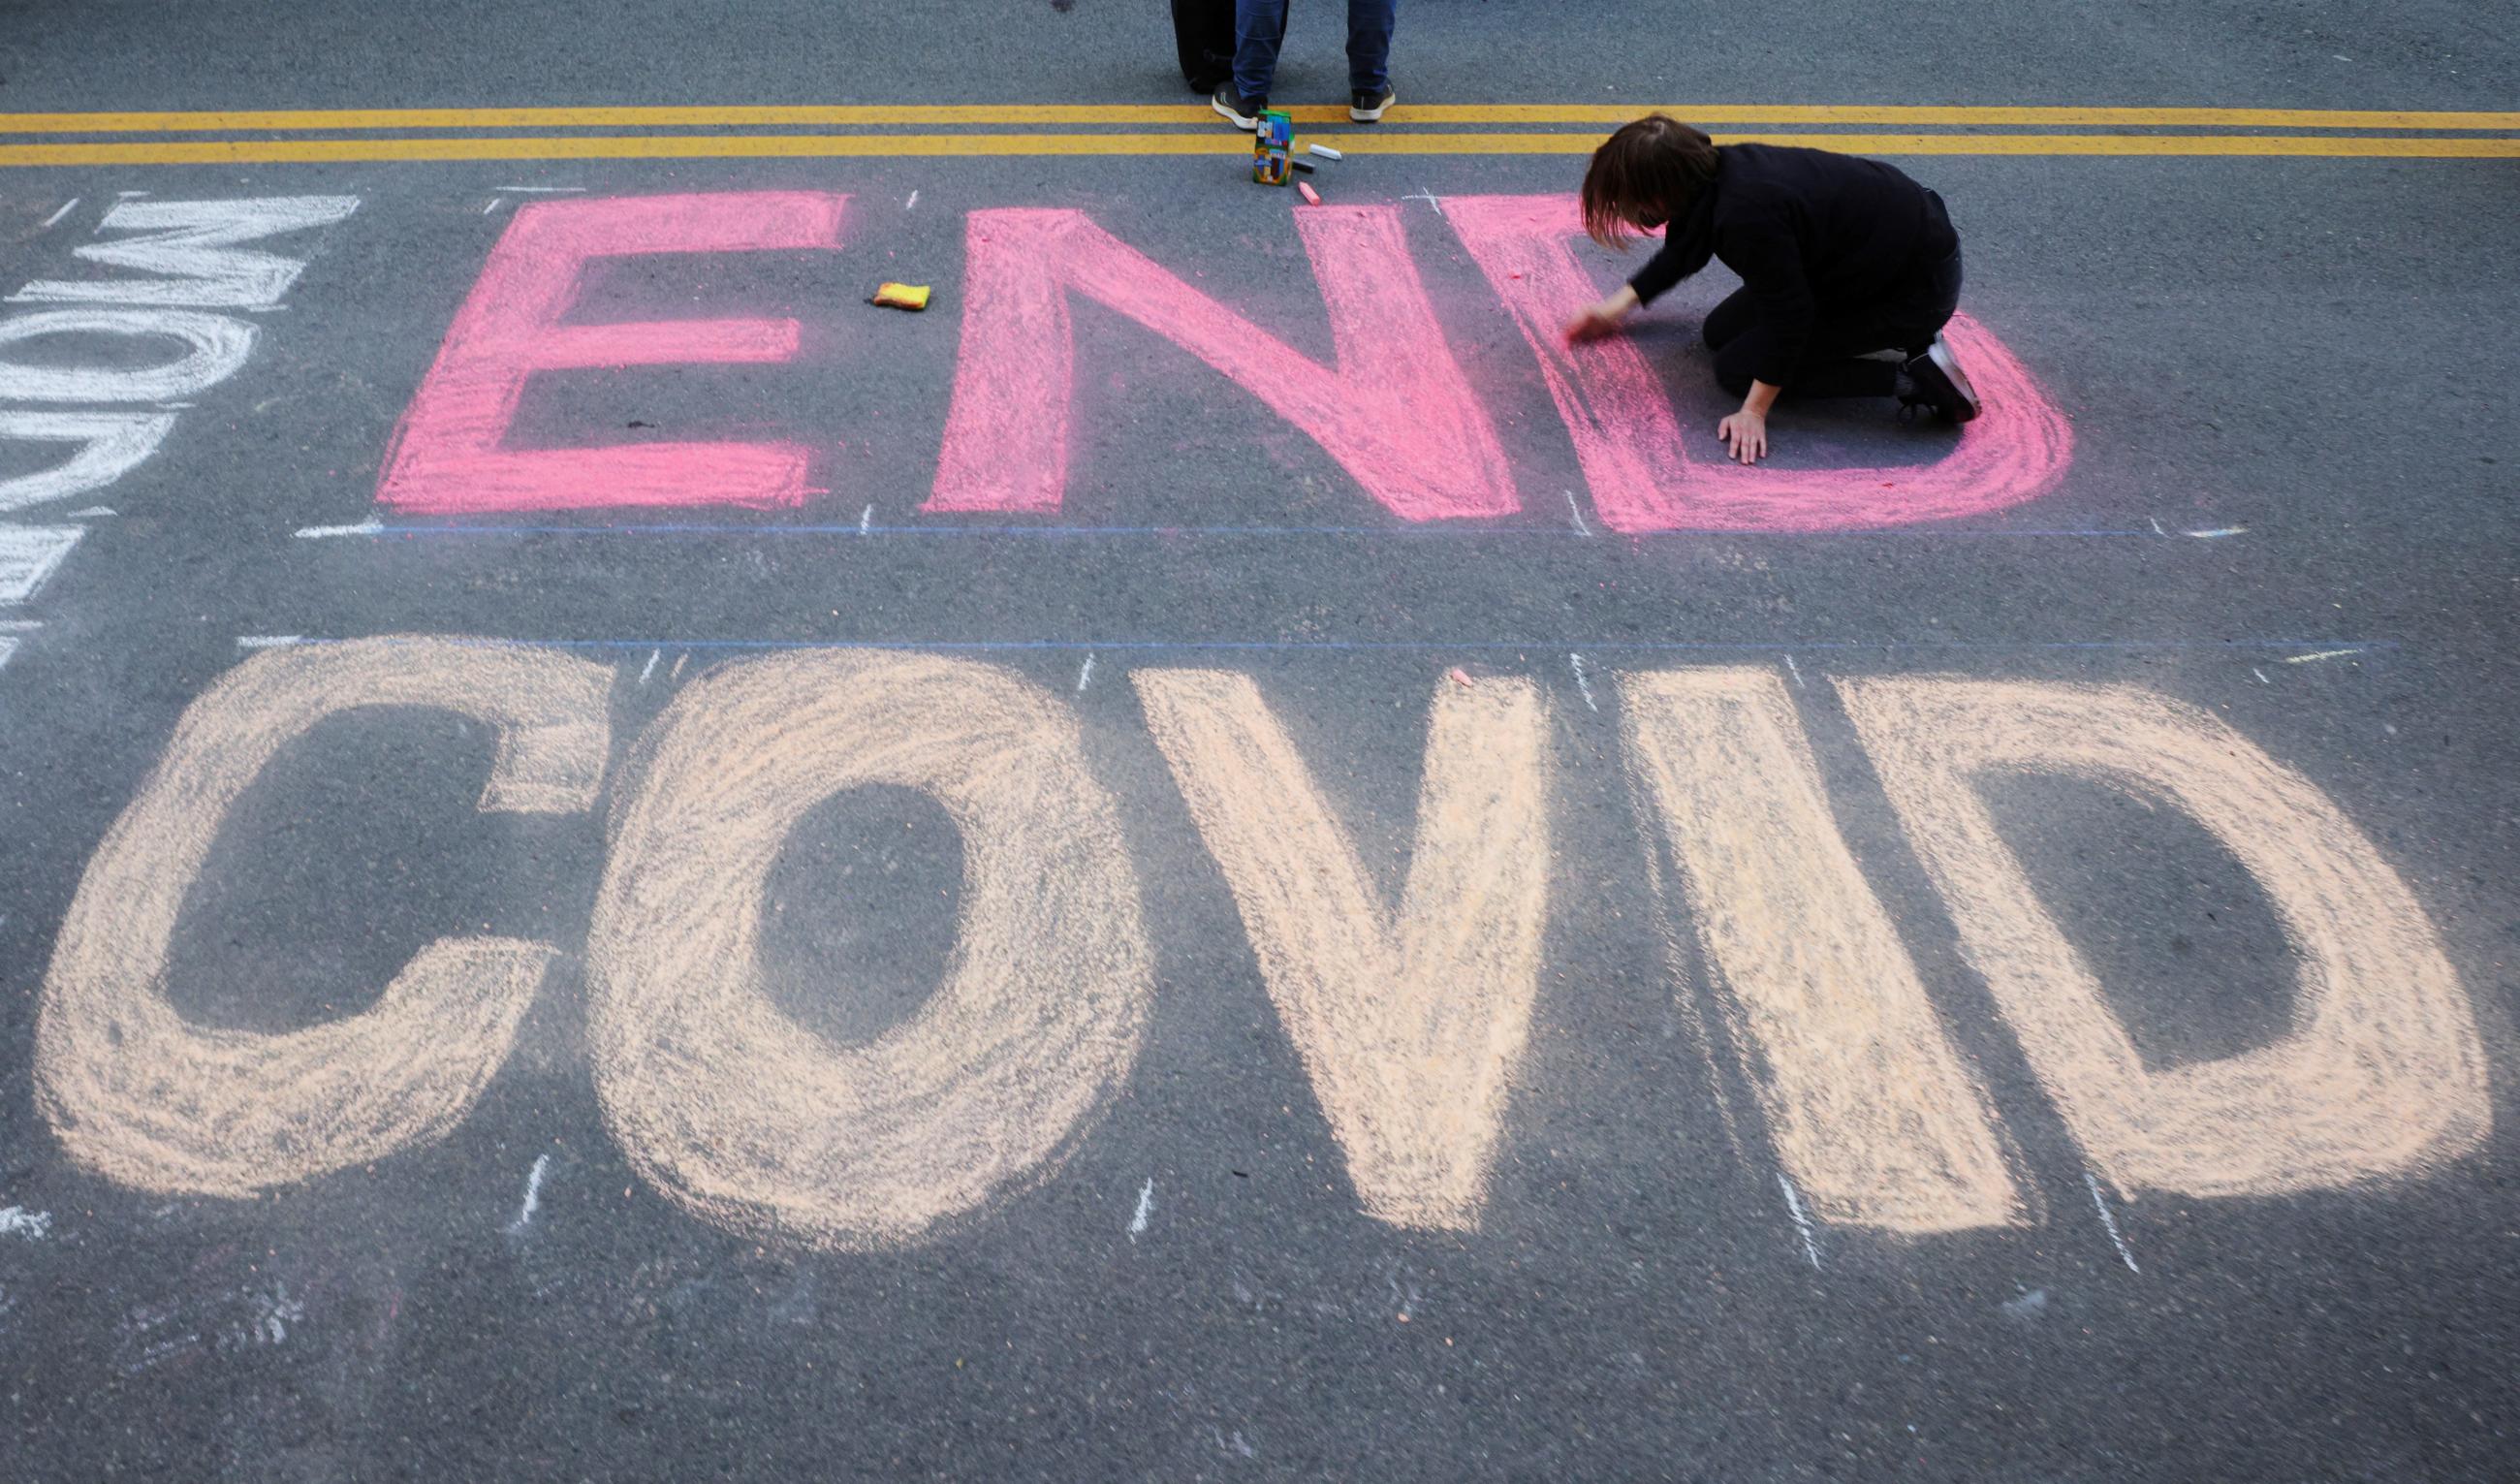 Demonstrators write "End COVID" in pink and yellow sidewalk chalk on the street outside Moderna headquarters, pushing for the company to share its COVID vaccine technology, in Cambridge, Massachusetts, on April 28, 2022. 